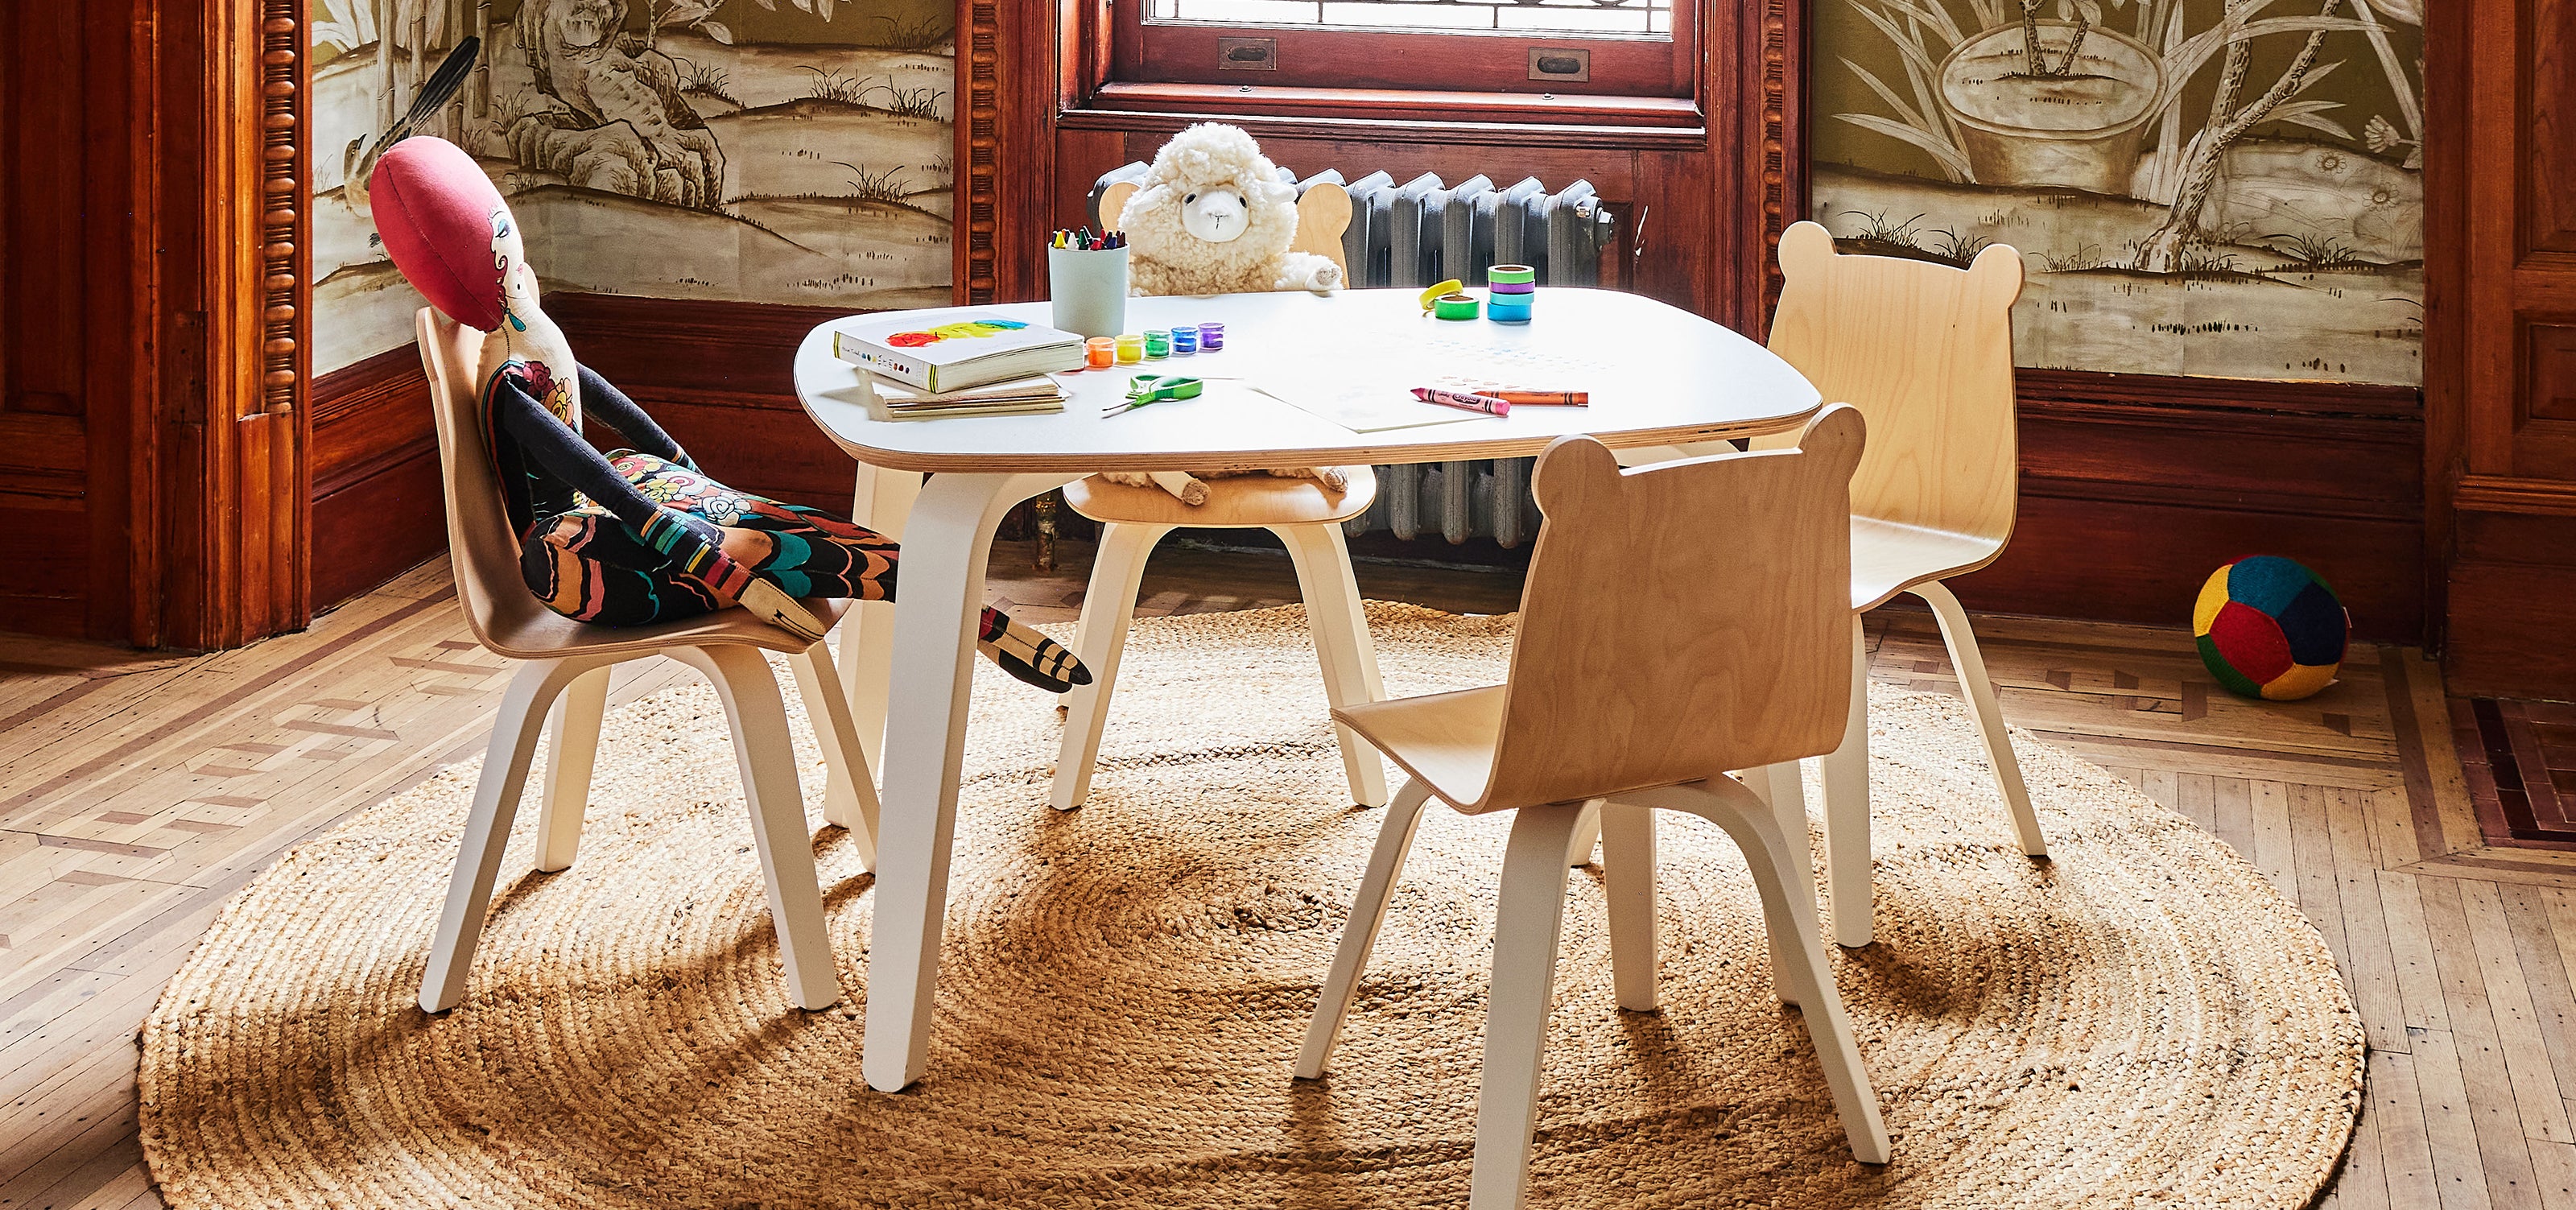 Modern, Eco-Friendly Kids Clothing and Furniture